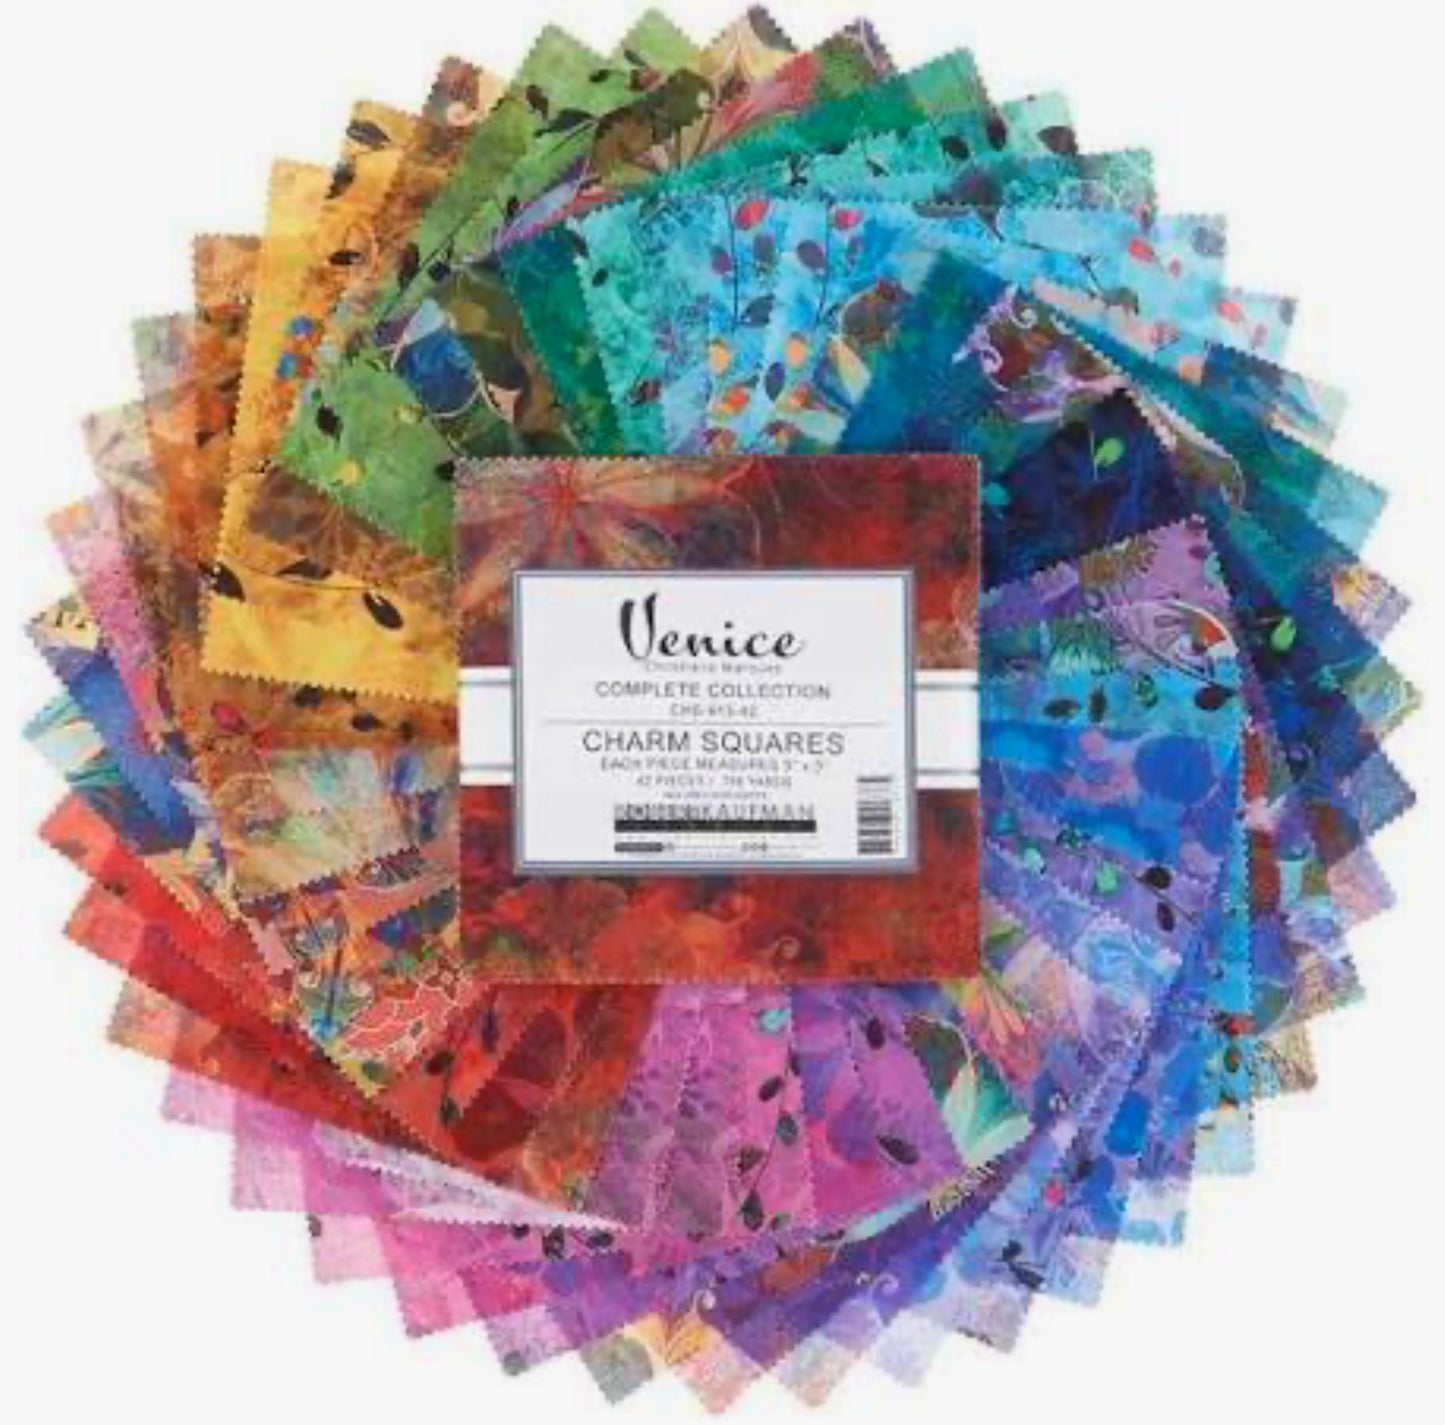 Venice Charm Squares 5 x 5 in. Complete Collection Robert Kaufman